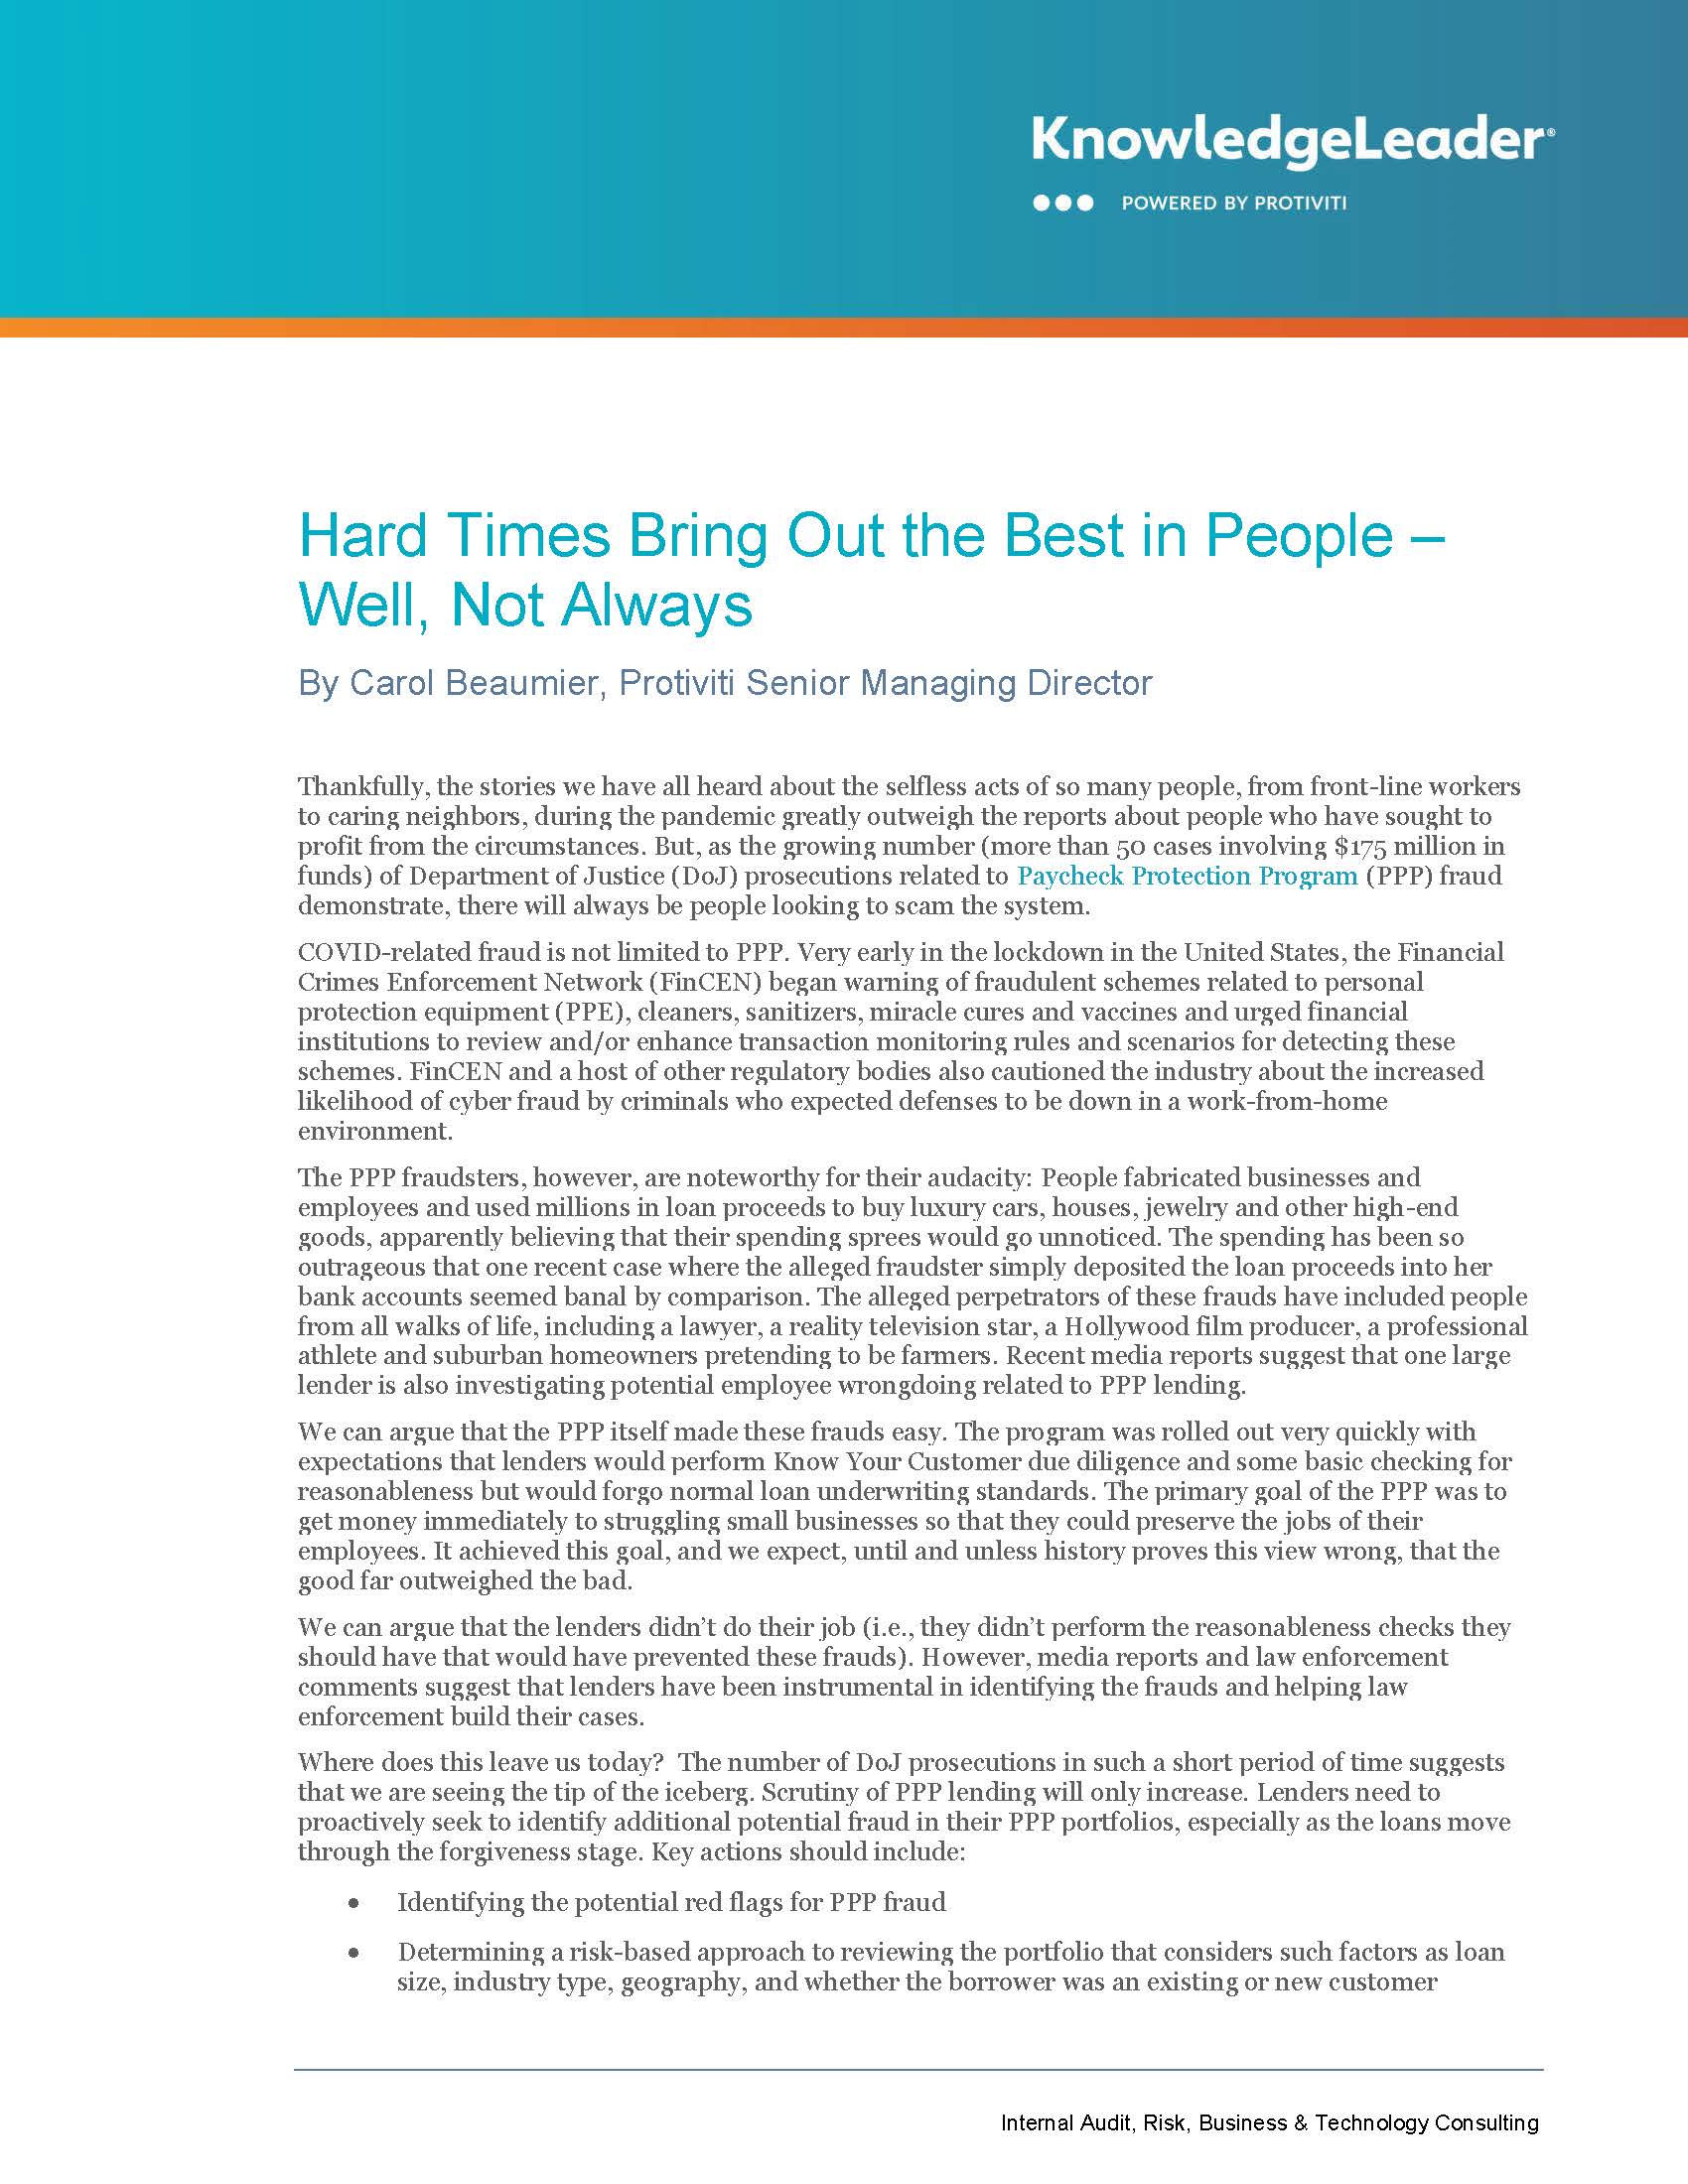 Screenshot of the first page of Hard Times Bring Out the Best in People – Well, Not Always